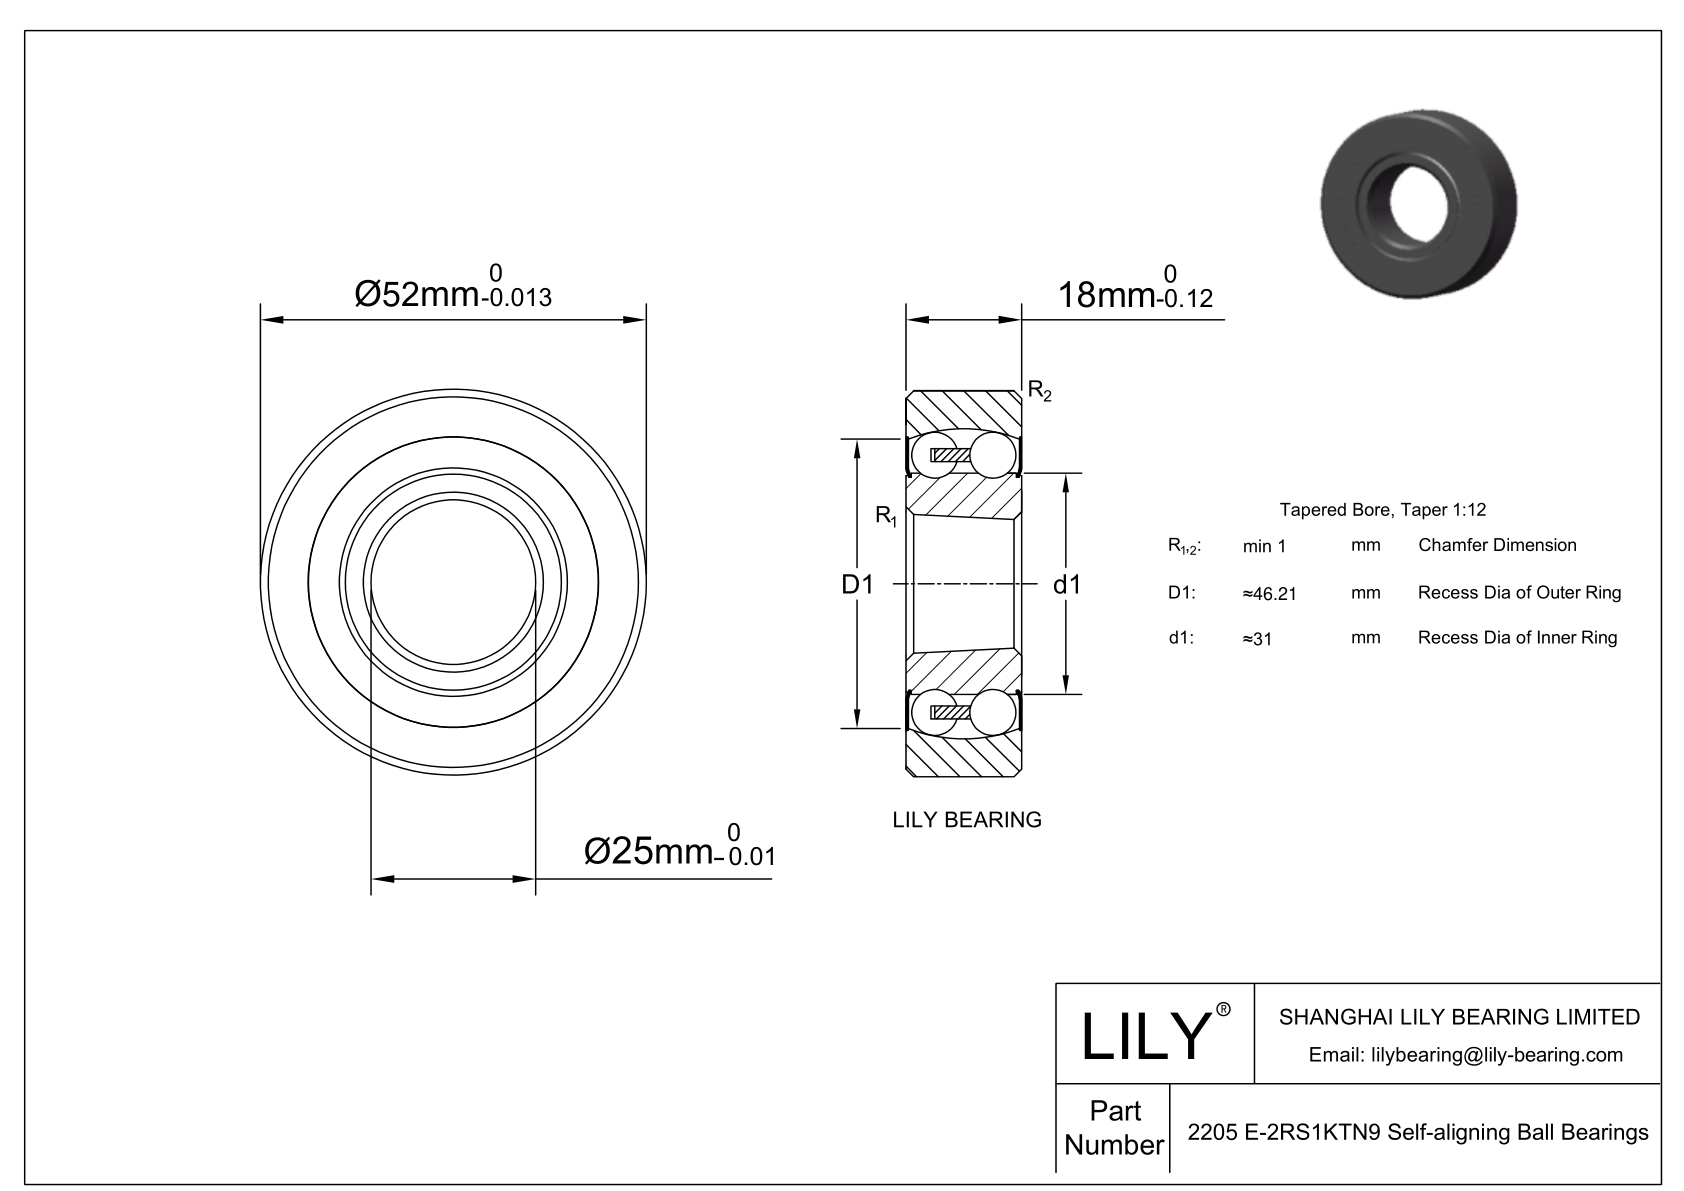 CE2205 E-SCPP Silicon Carbide Self Aligning Ball Bearings cad drawing